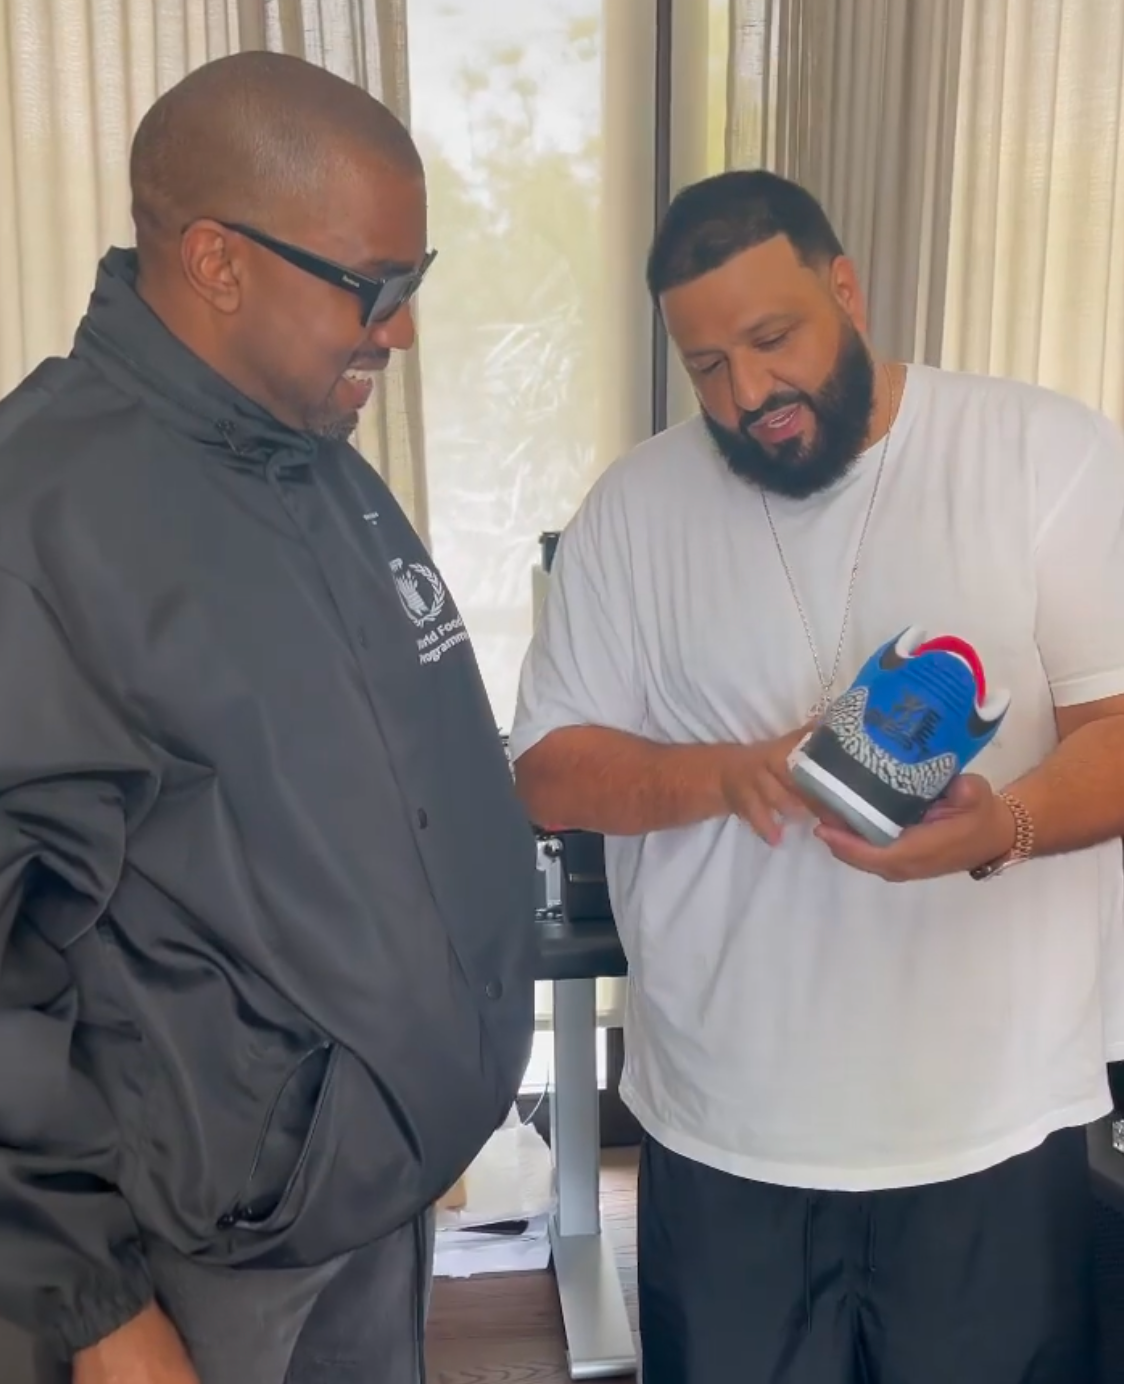 DJ Khaled Brought A LV Pillow To Protect His Shoes From The